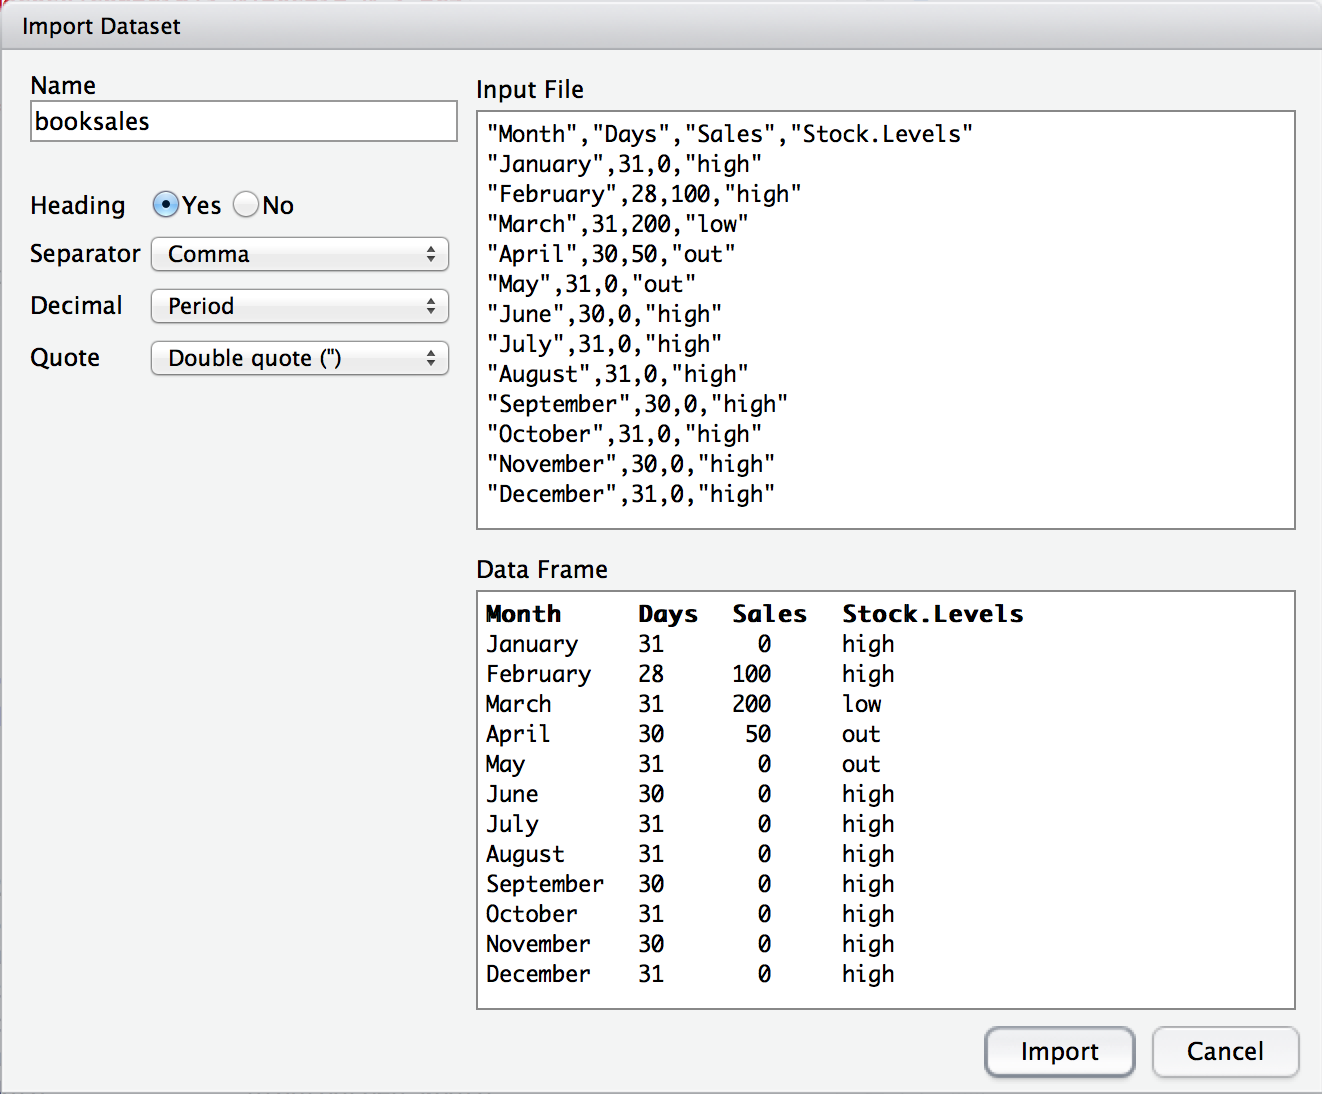 The Rstudio window for importing a CSV file into R